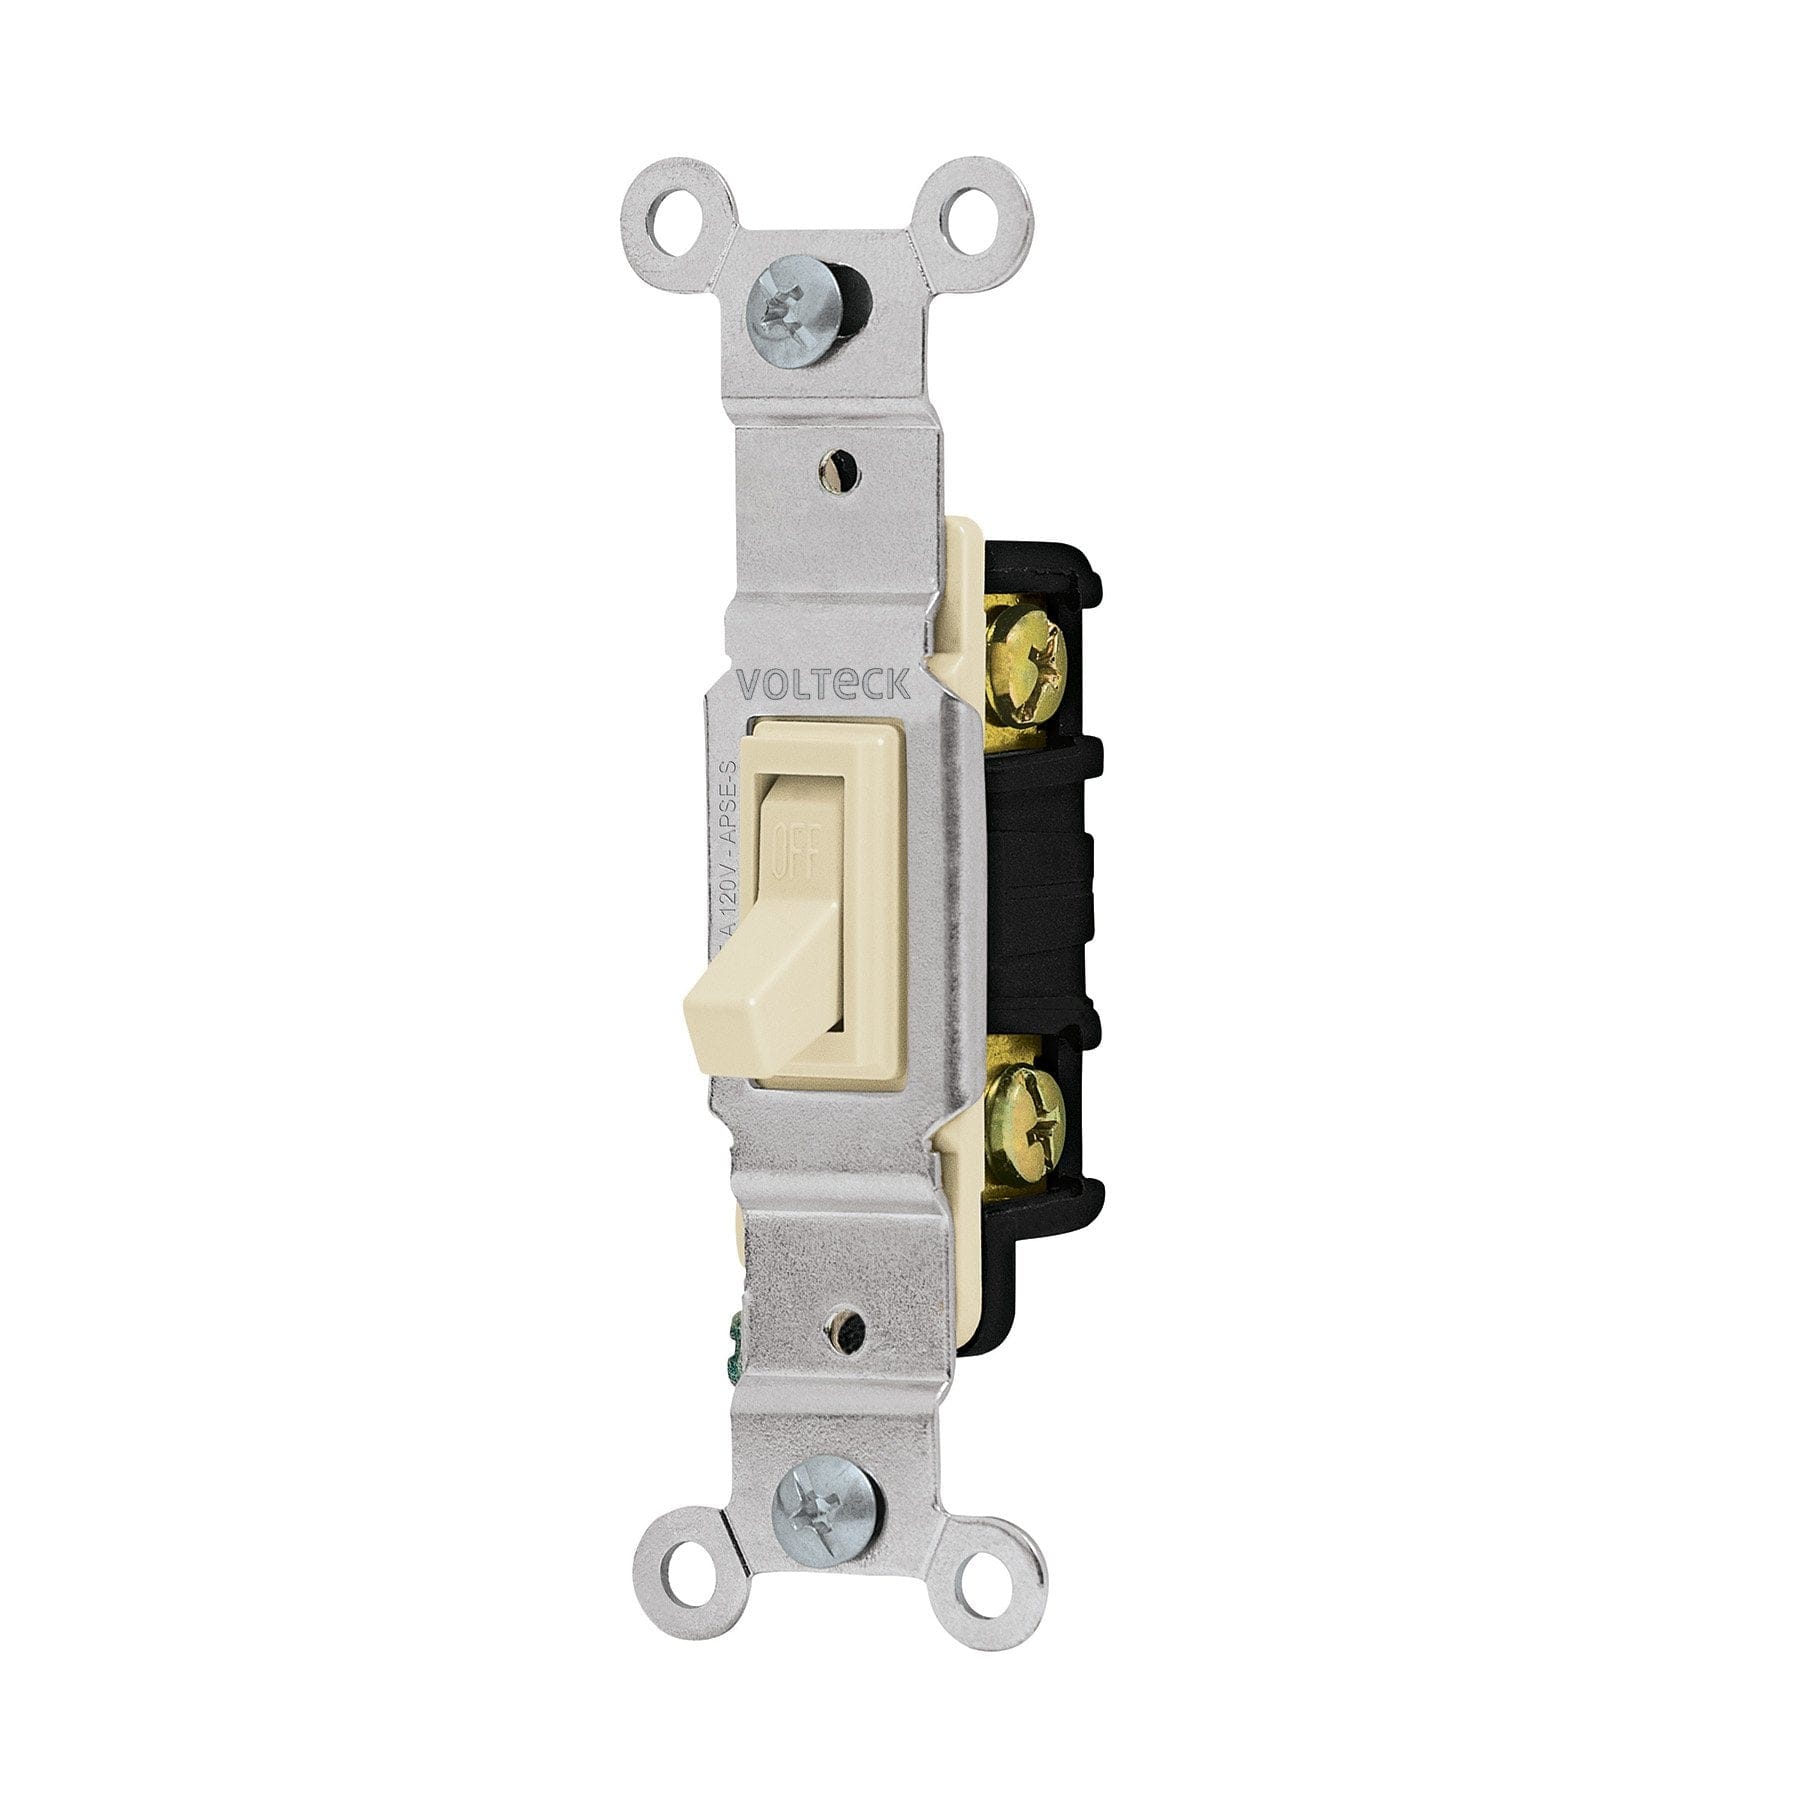 Volteck Vertical Switch (APSE-S) 120V~, 15A. Durable Shutter for a Variety of Electrical Devices - VOLTECH 46000